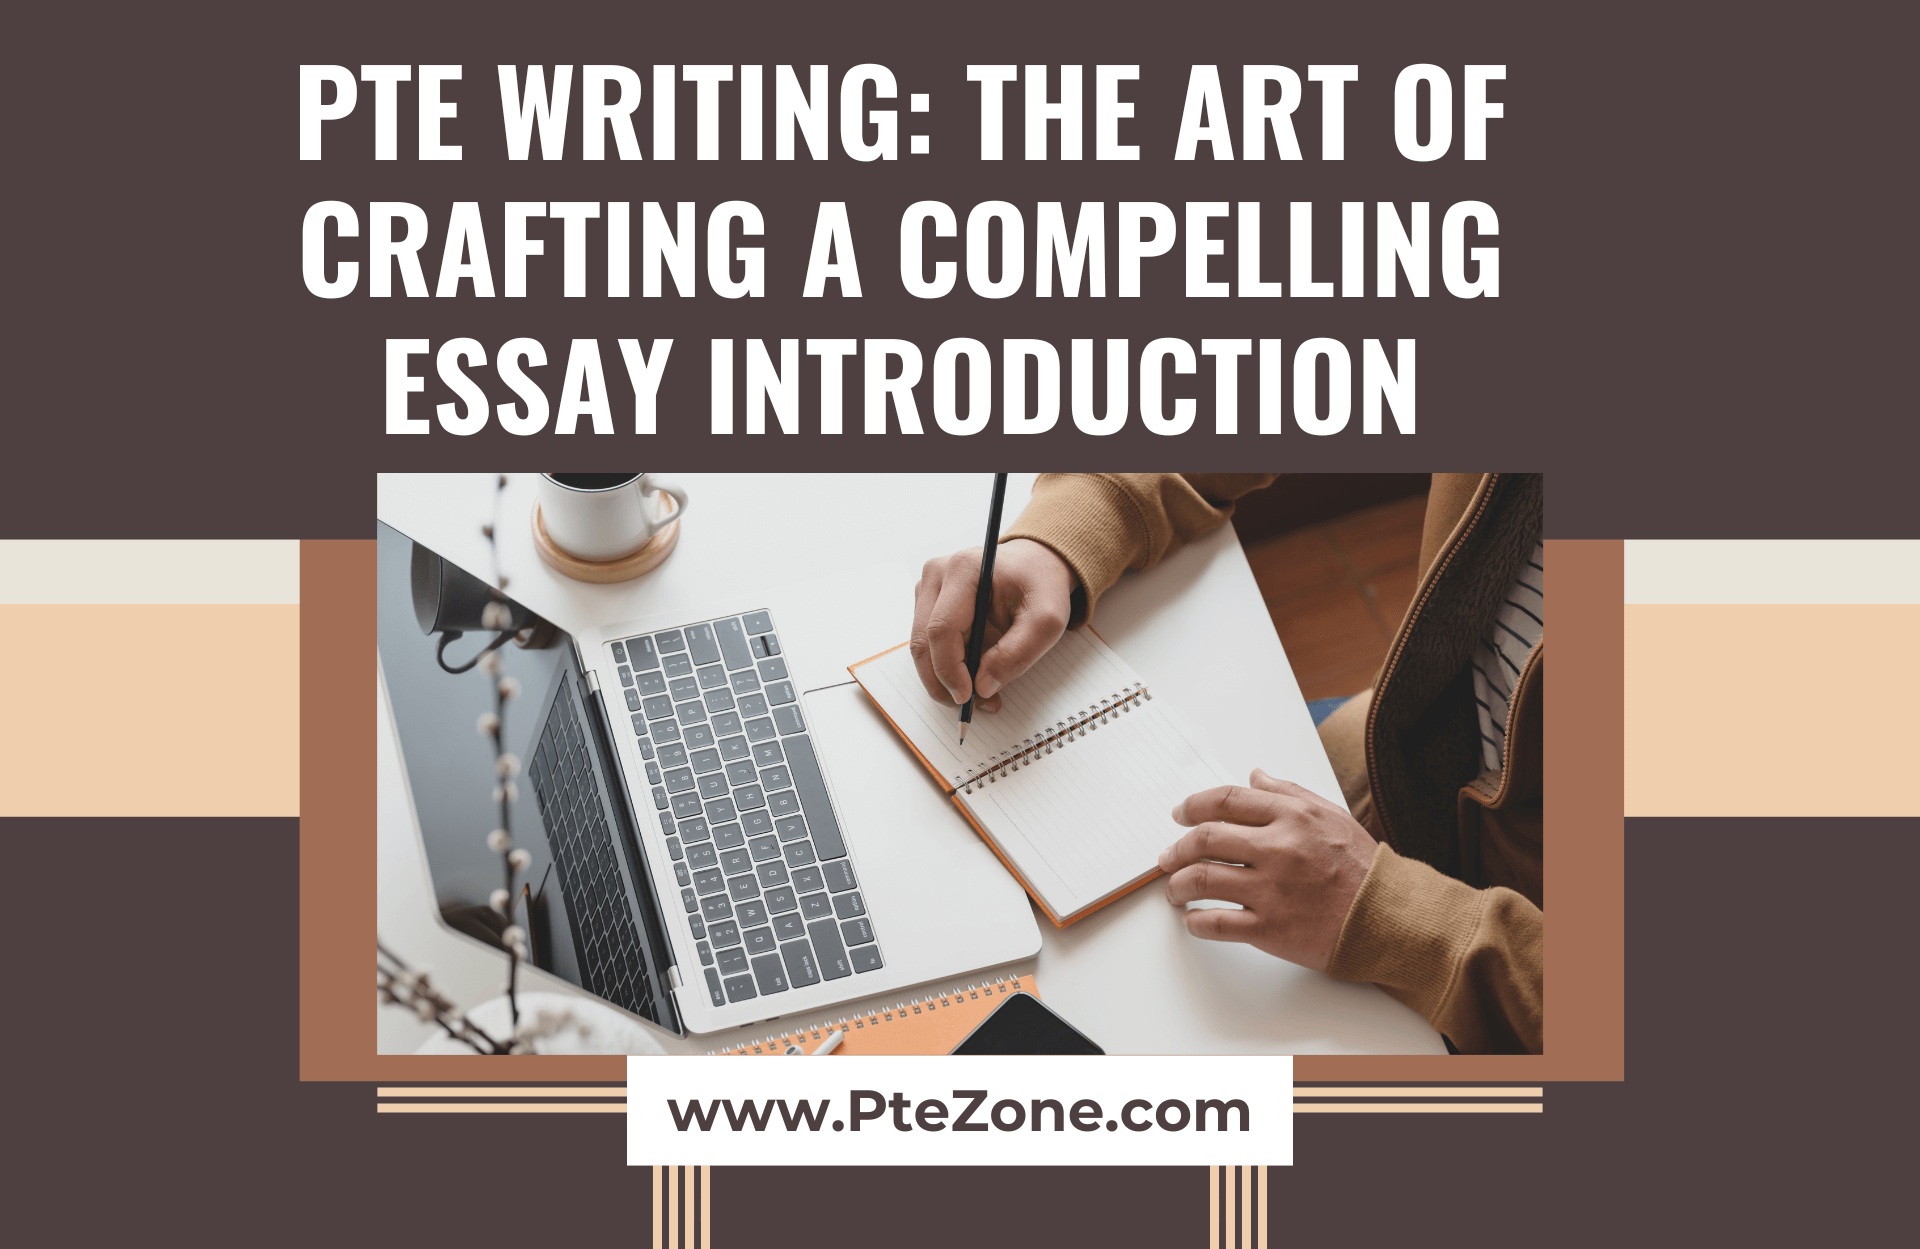 You are currently viewing PTE Writing: The Art of Crafting a Compelling Essay Introduction